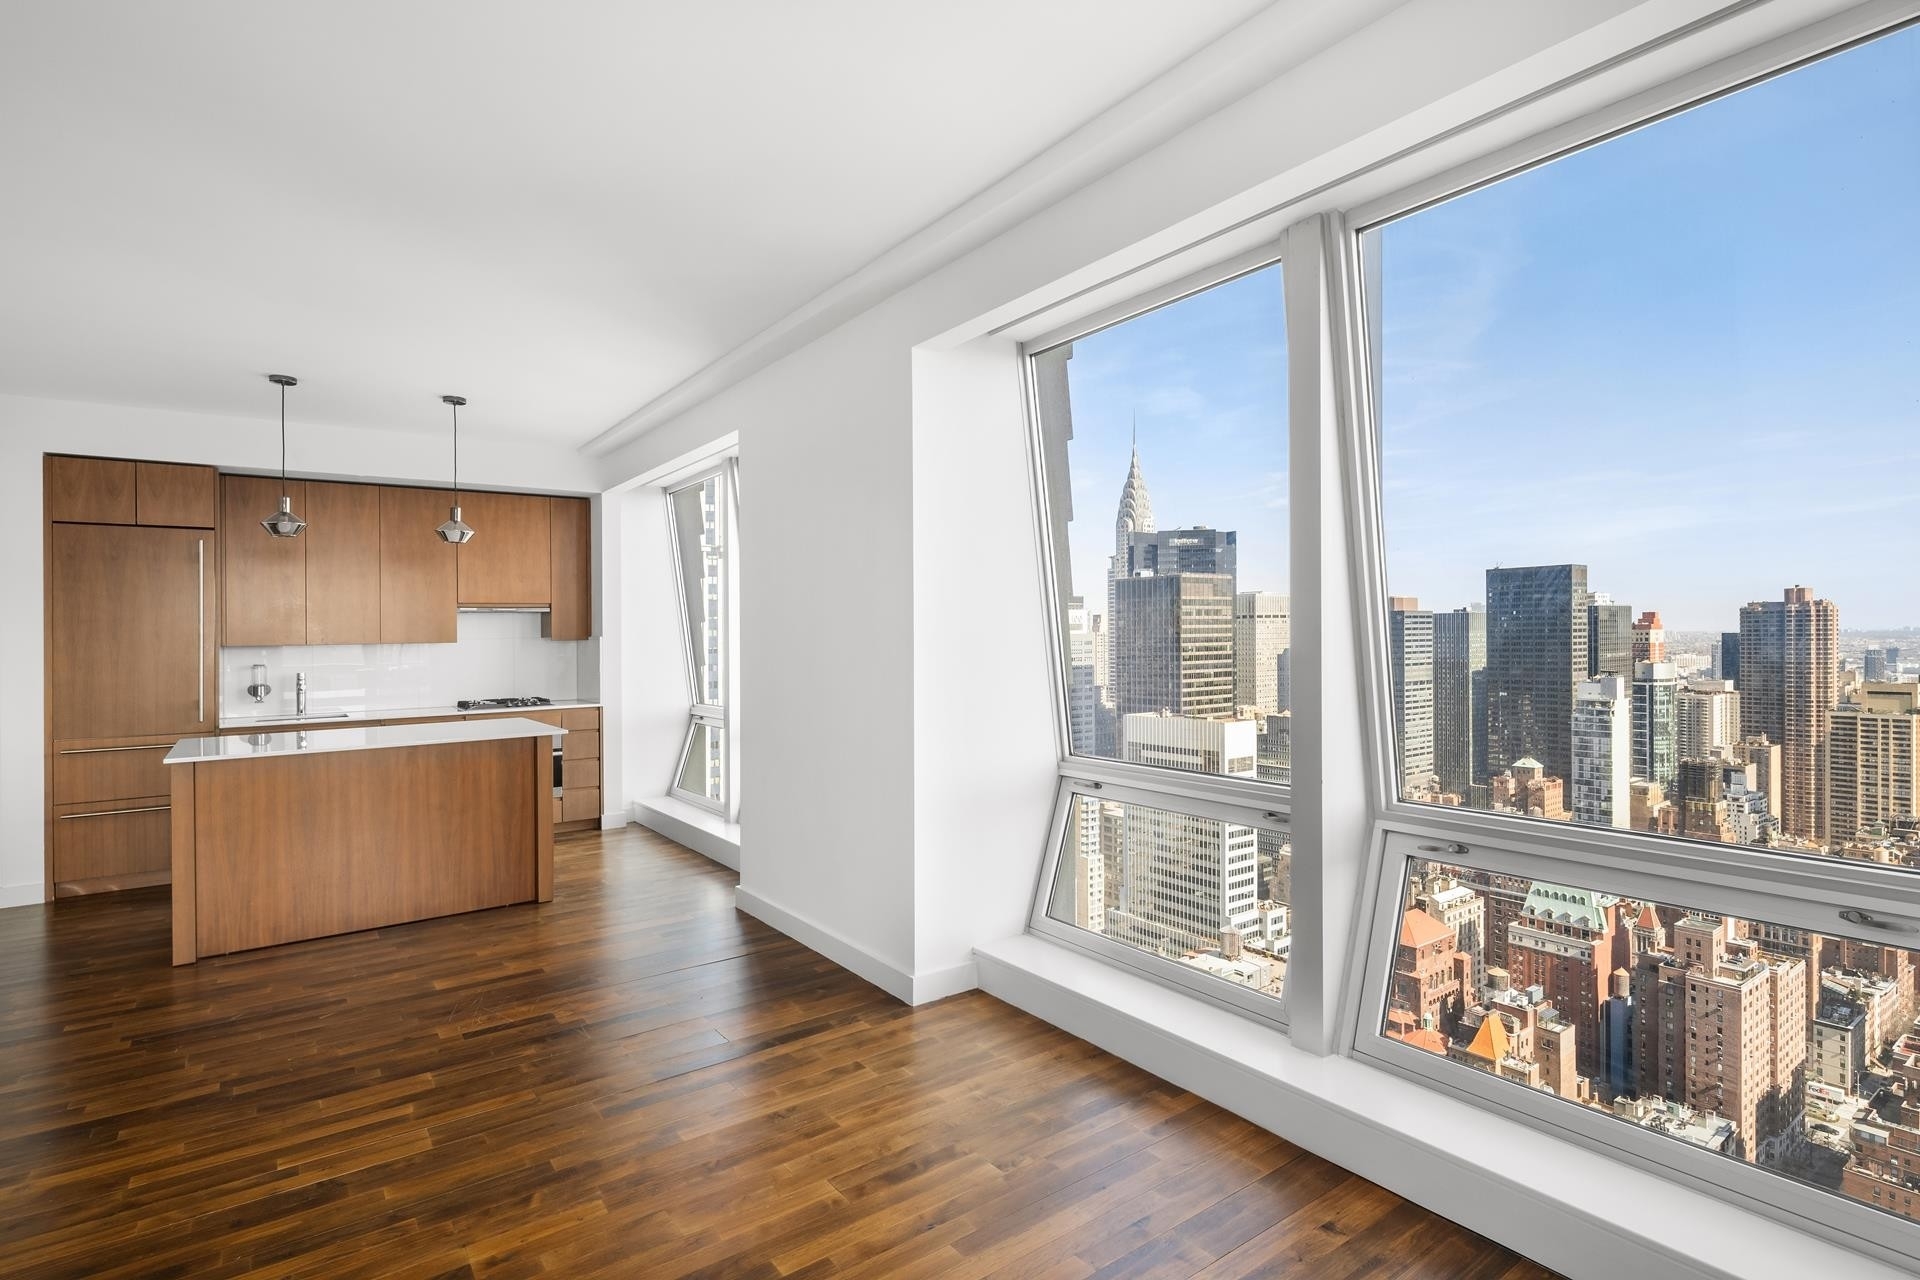 3. Rentals at Residences-Langham, 400 FIFTH AVE, 46A New York